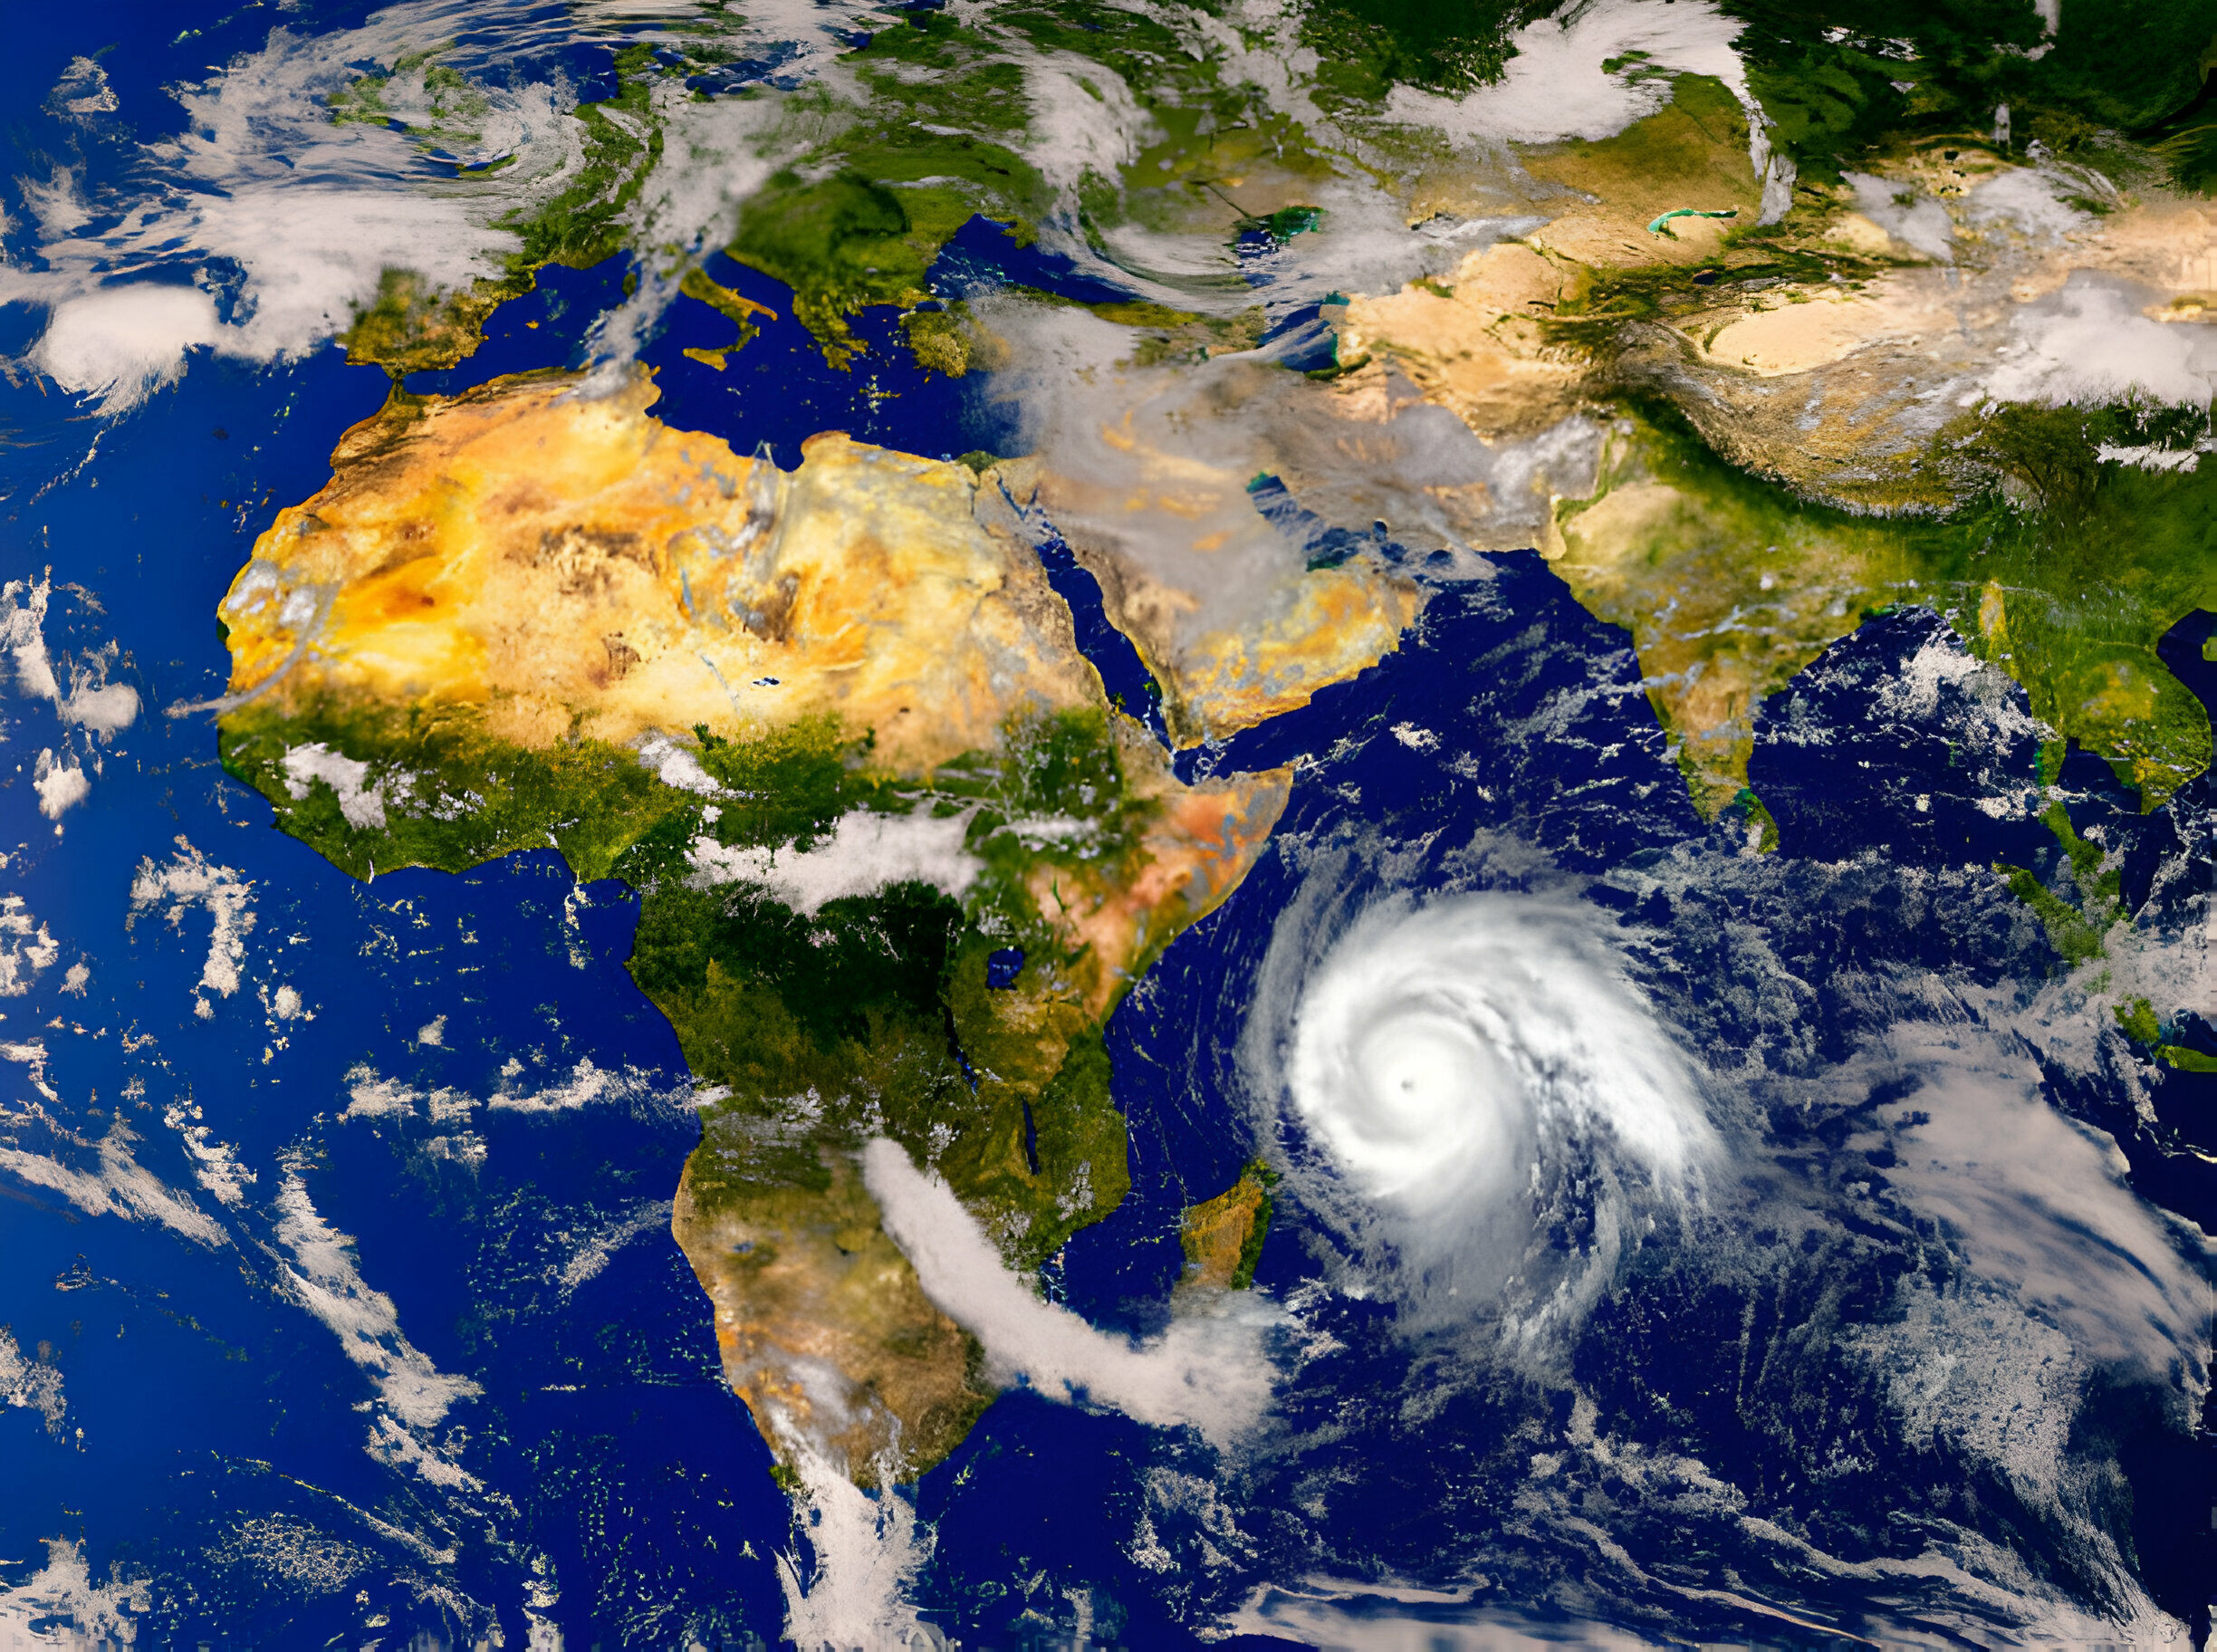 How are tropical cyclones related to climate change?